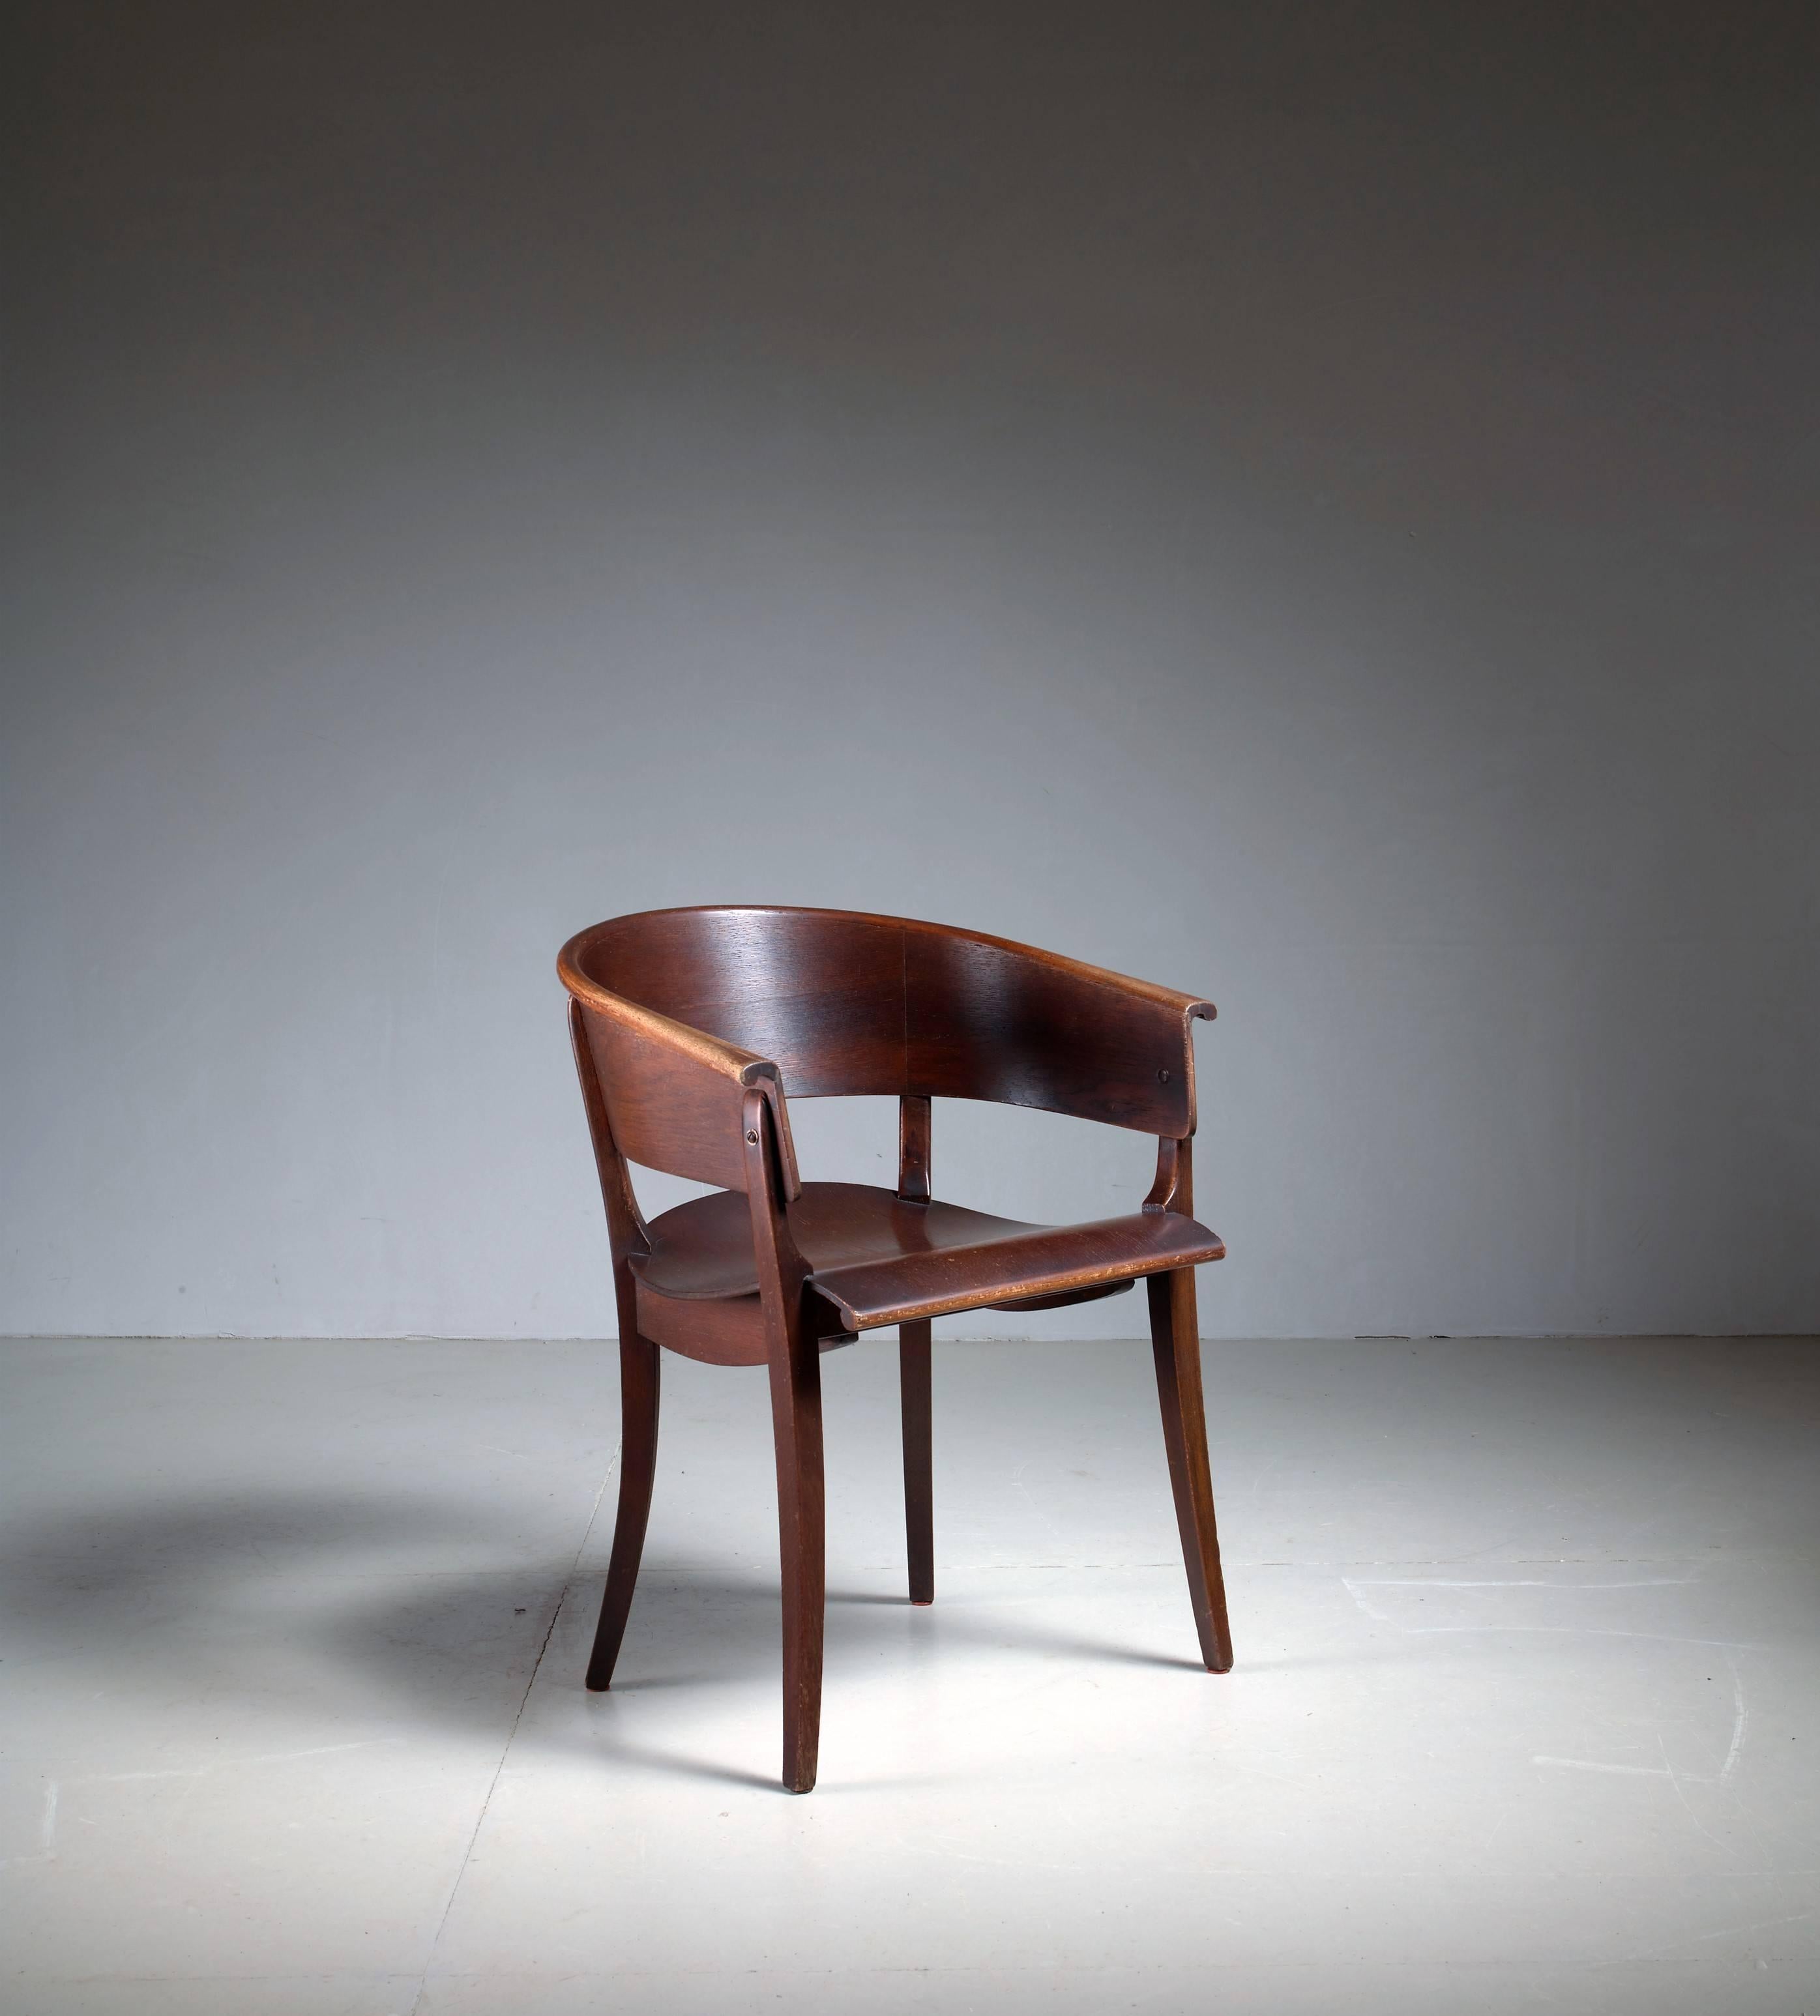 A curved armchair designed around 1928 by Ernst Rockhausen for Rockhausen, Germany.

The chair is made of beech plywood and oak veneer. Stamped by Rockhausen underneath. There are some minor losses to the veneer, but the chair is in an overall very